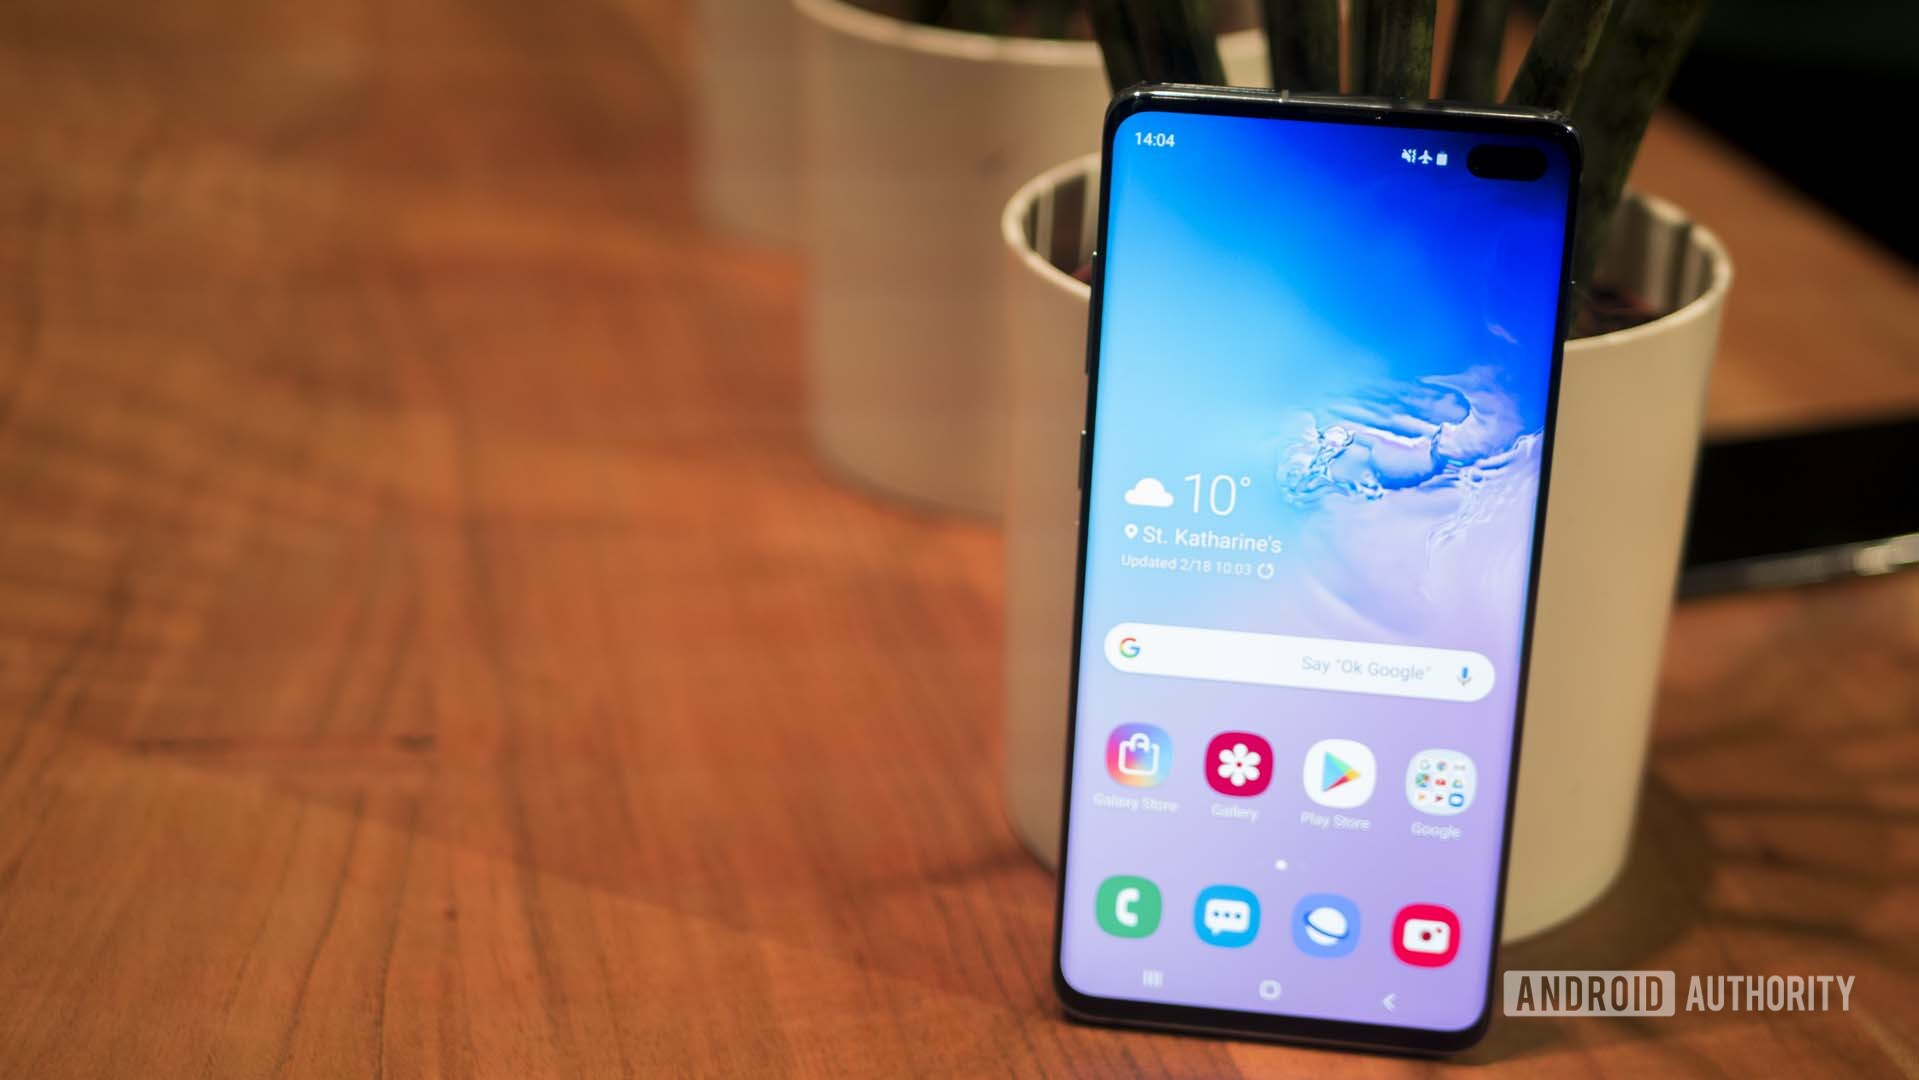 Samsung Galaxy S10 Wallpapers Are Here Download Them At Full Glorious 